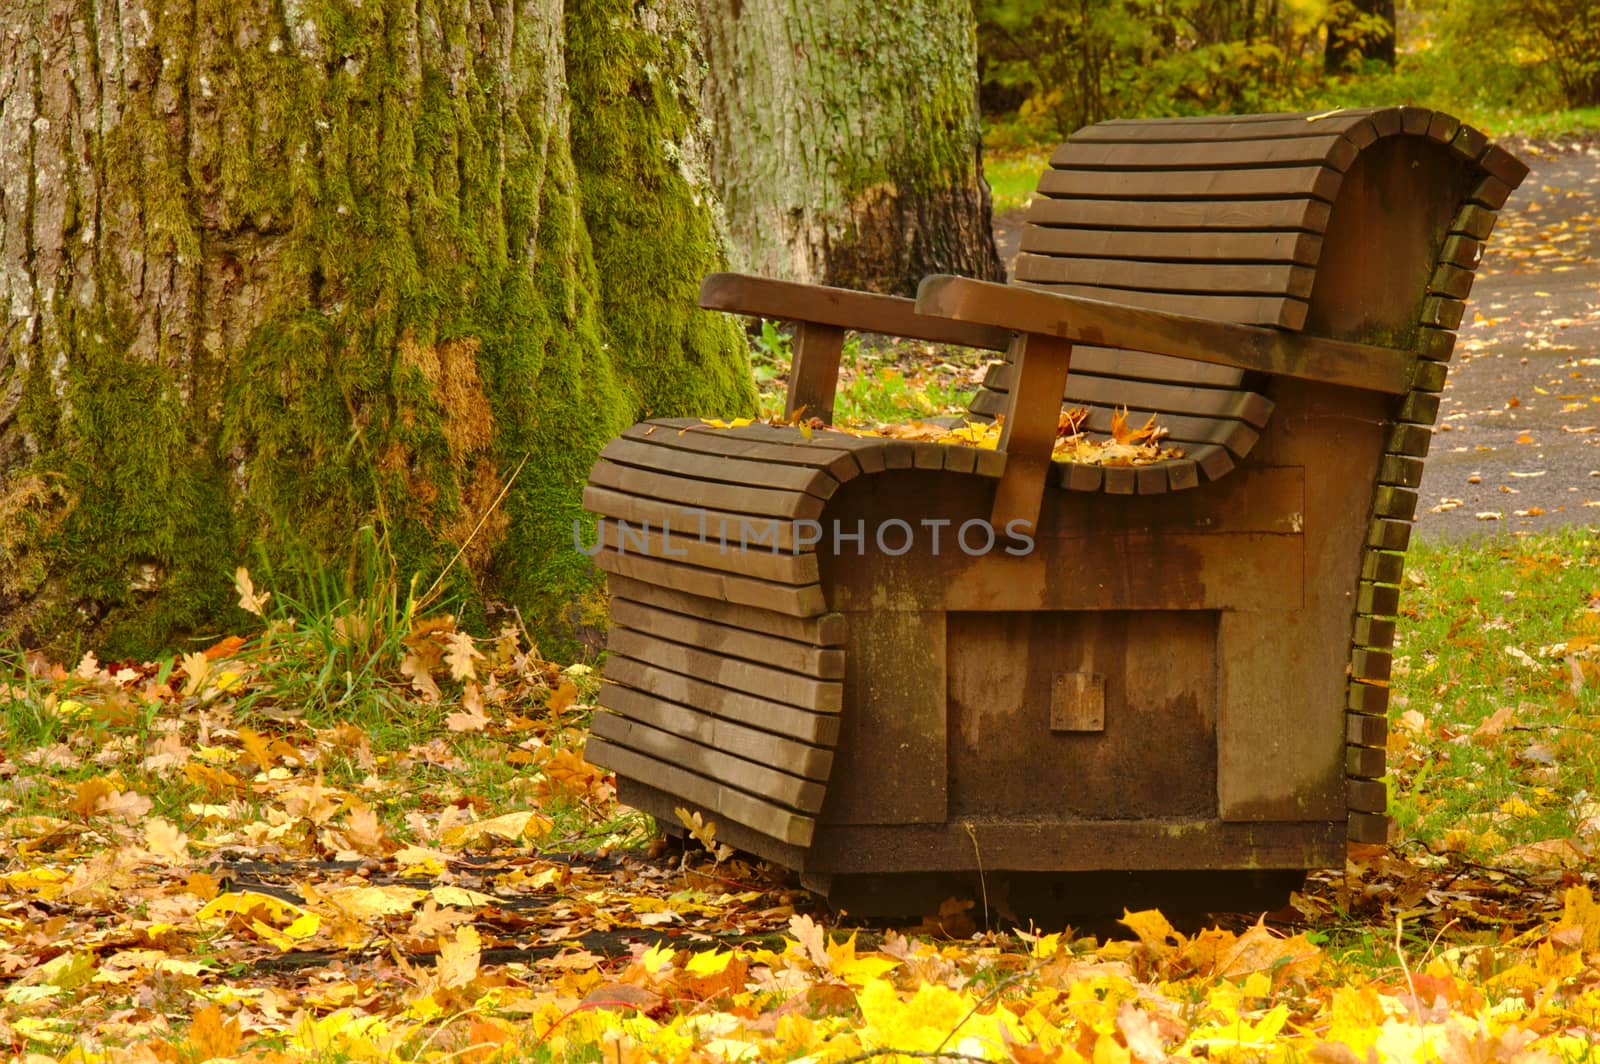 Old bench in the park in autumn, surrounded with yellow fallen leaves